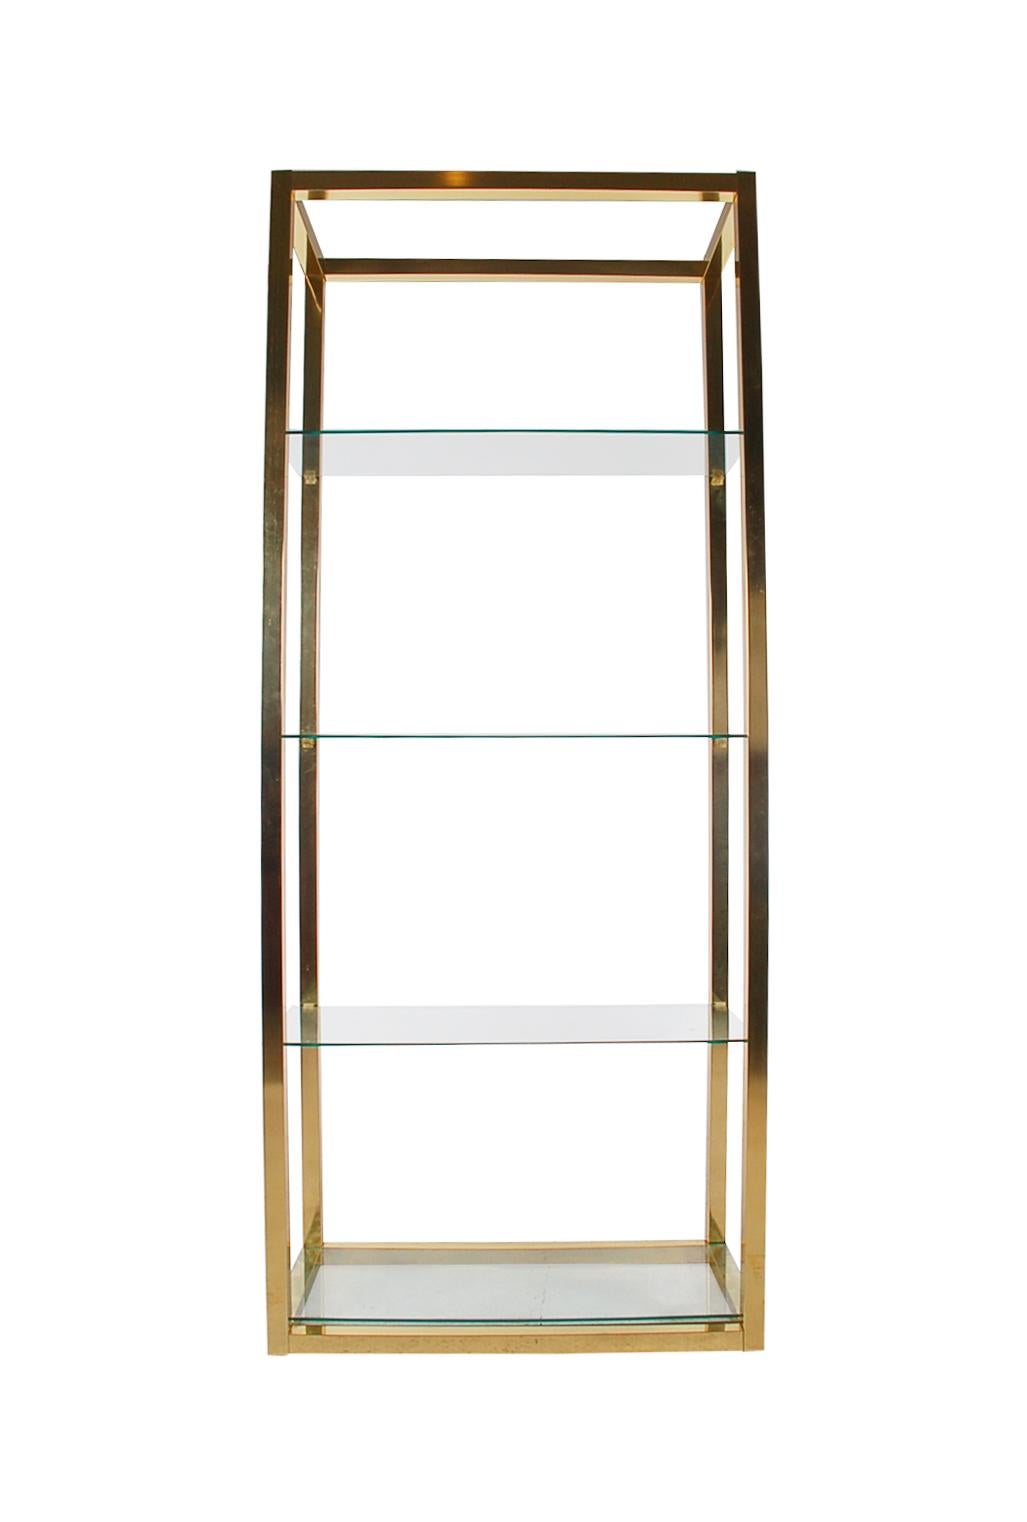 Italian Hollywood Regency Modern Brass and Glass Étagère, Wall Unit or Shelving Unit